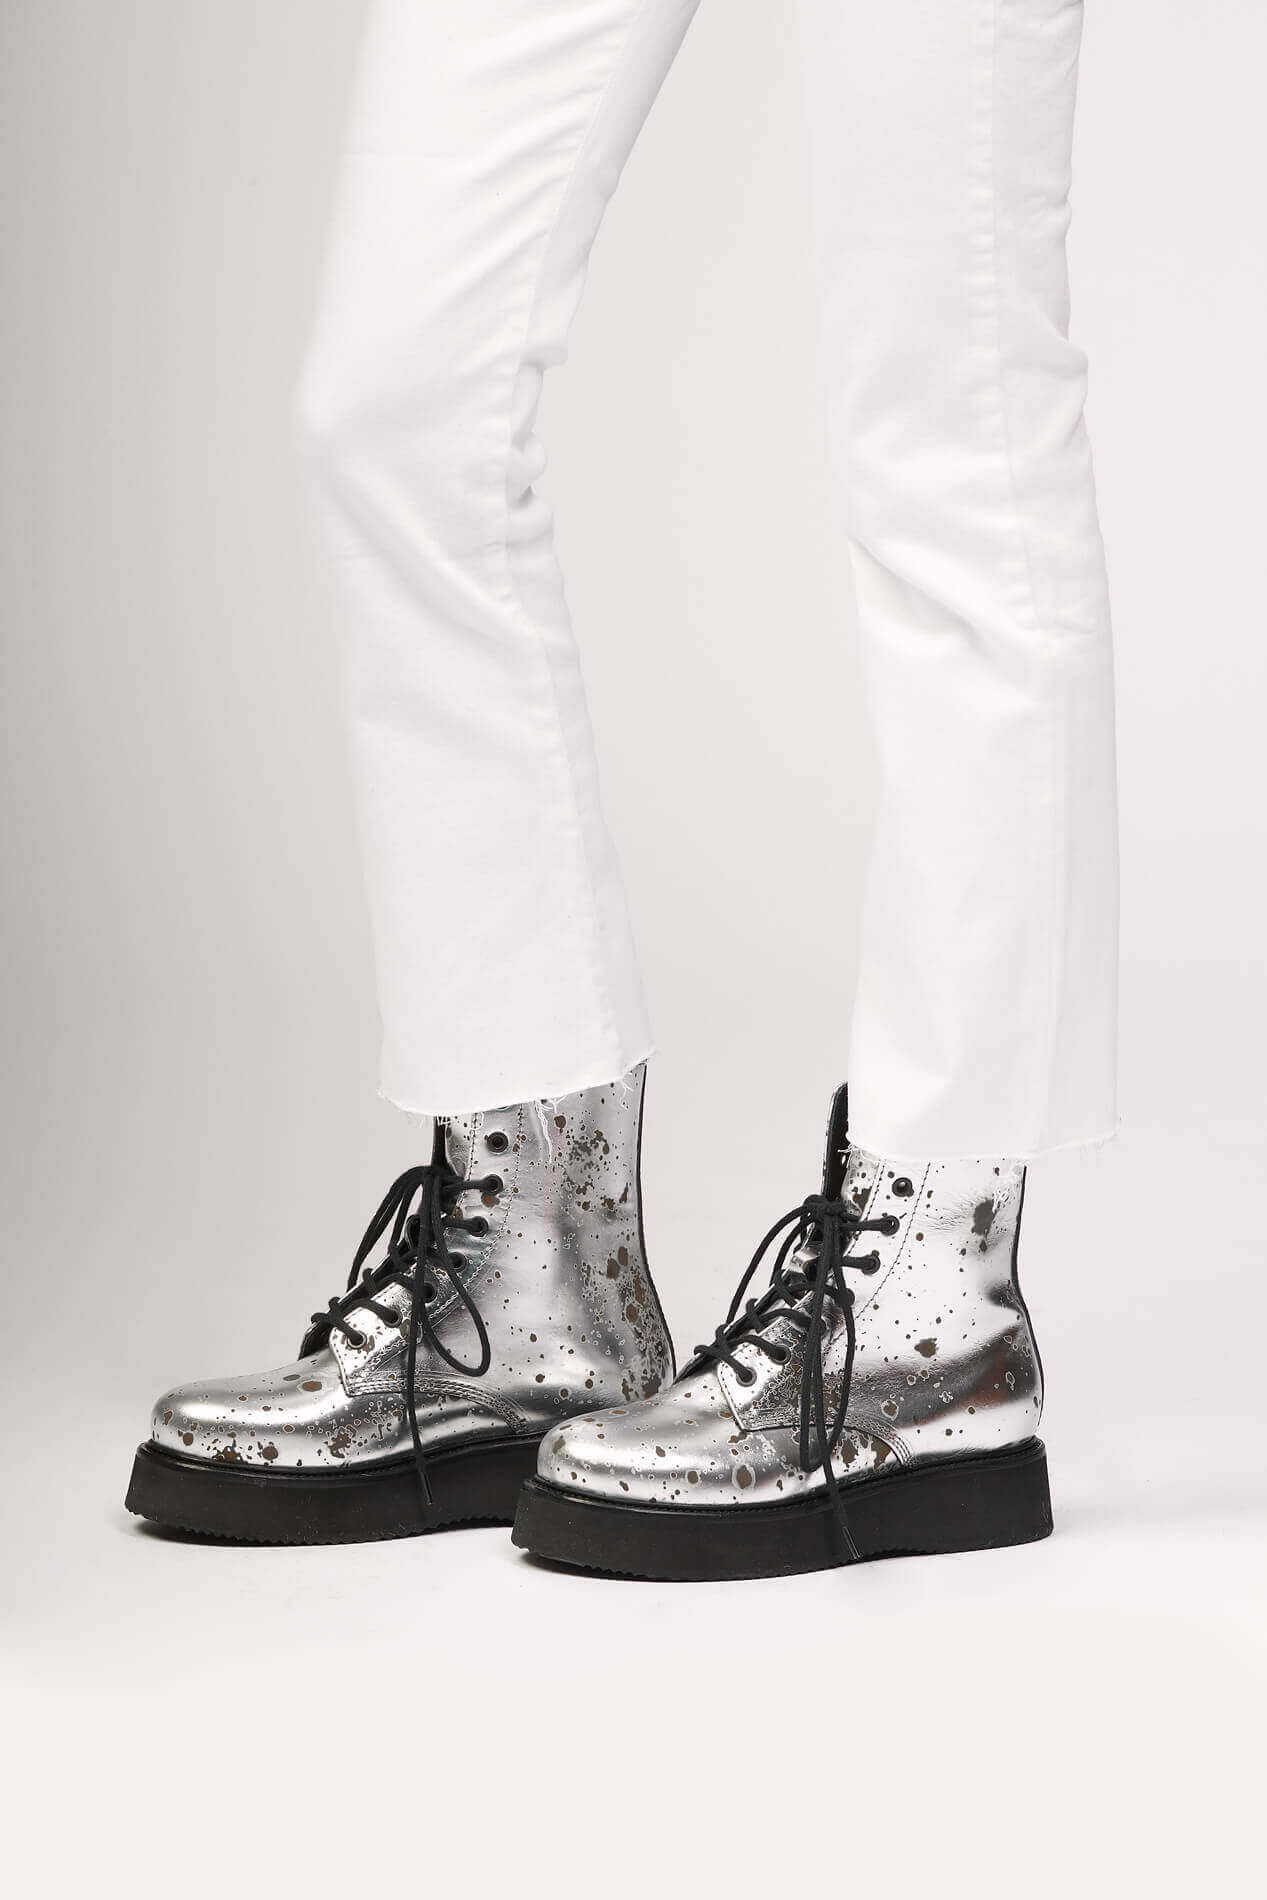 ARMY MOON BOOT Silver leather boots. Black laces. Sole height: 4 cm. Made in Italy. HTC LOS ANGELES